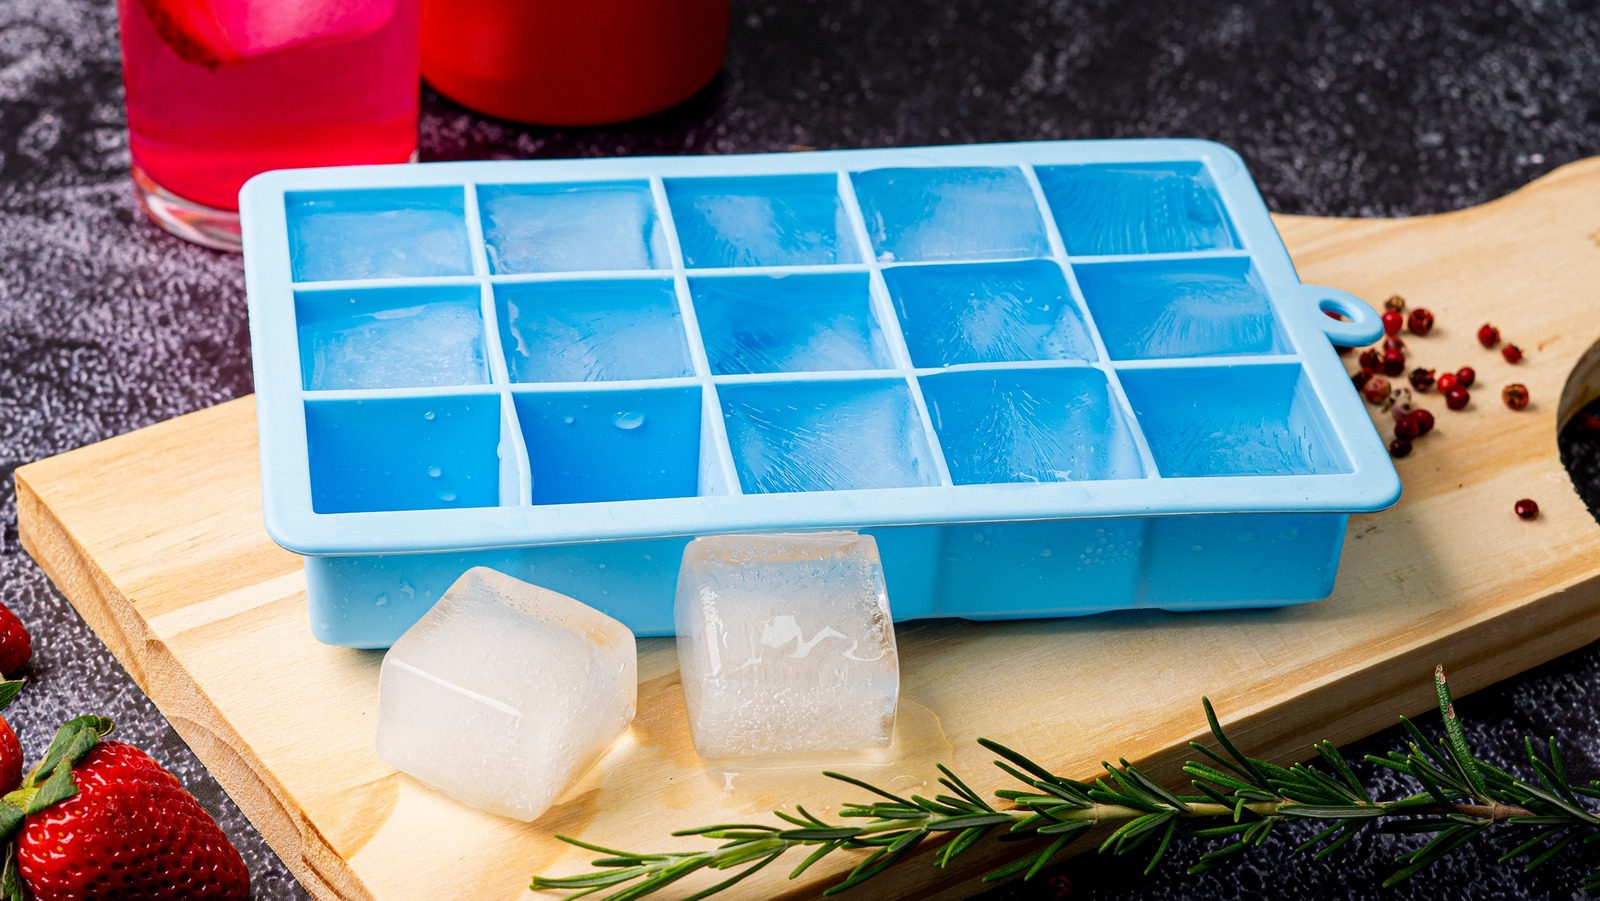 https://www.foodrepublic.com/img/gallery/how-long-ice-cubes-take-to-freeze-and-how-to-make-it-faster/l-intro-1700210624.jpg